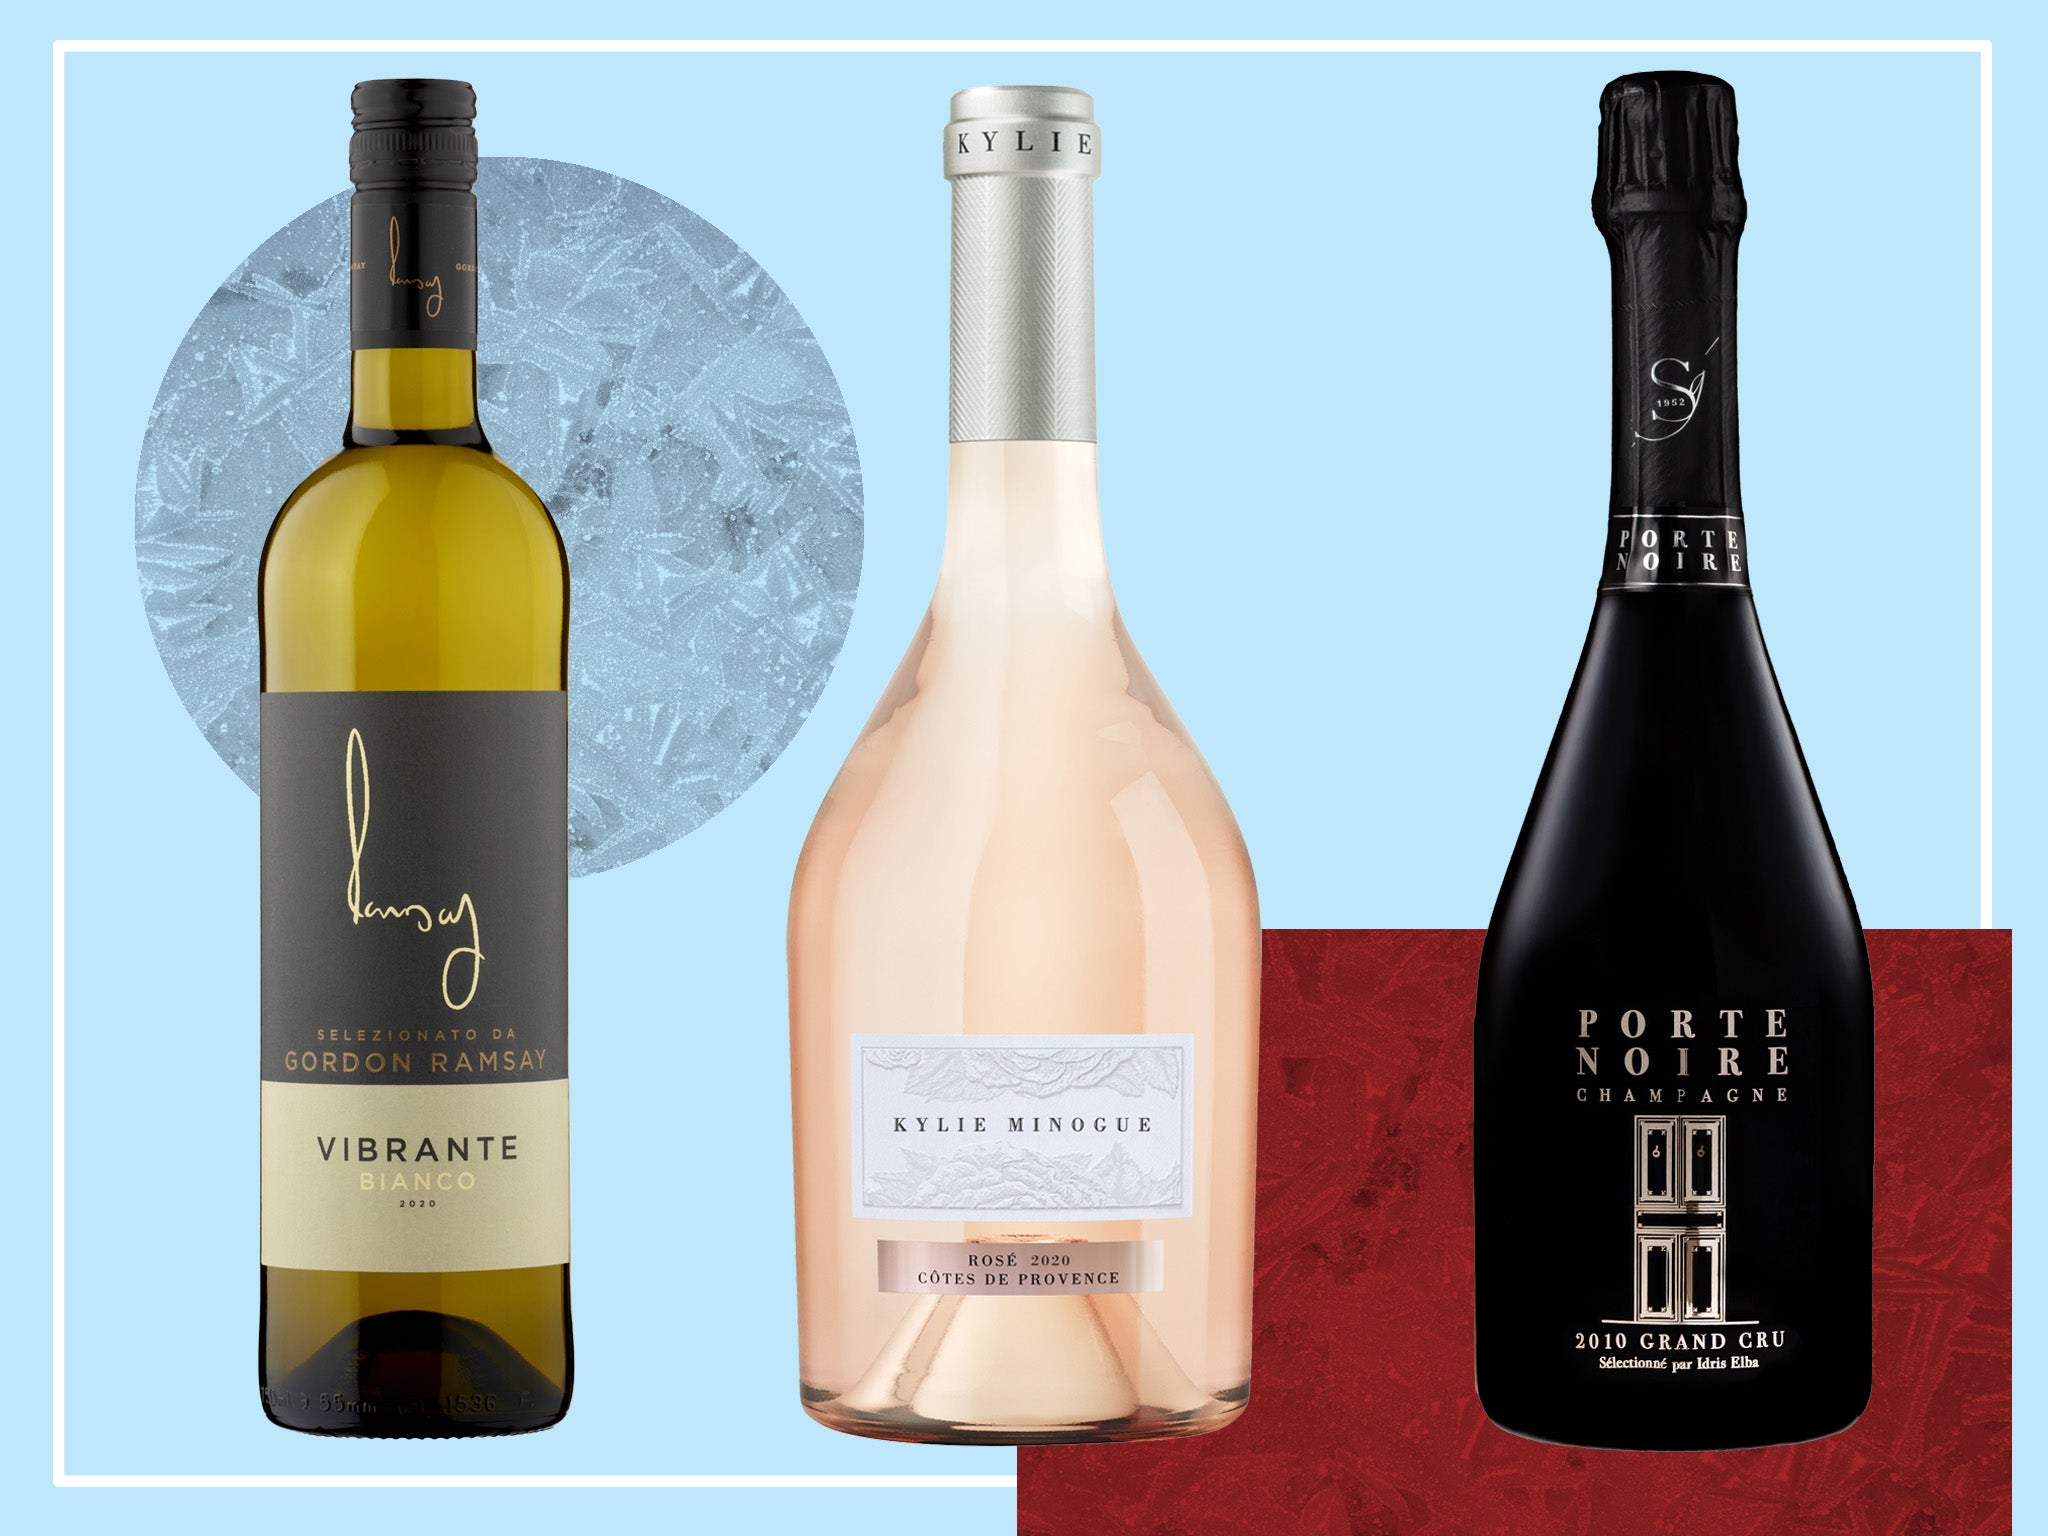 These wines are genuine passion projects from A-listers